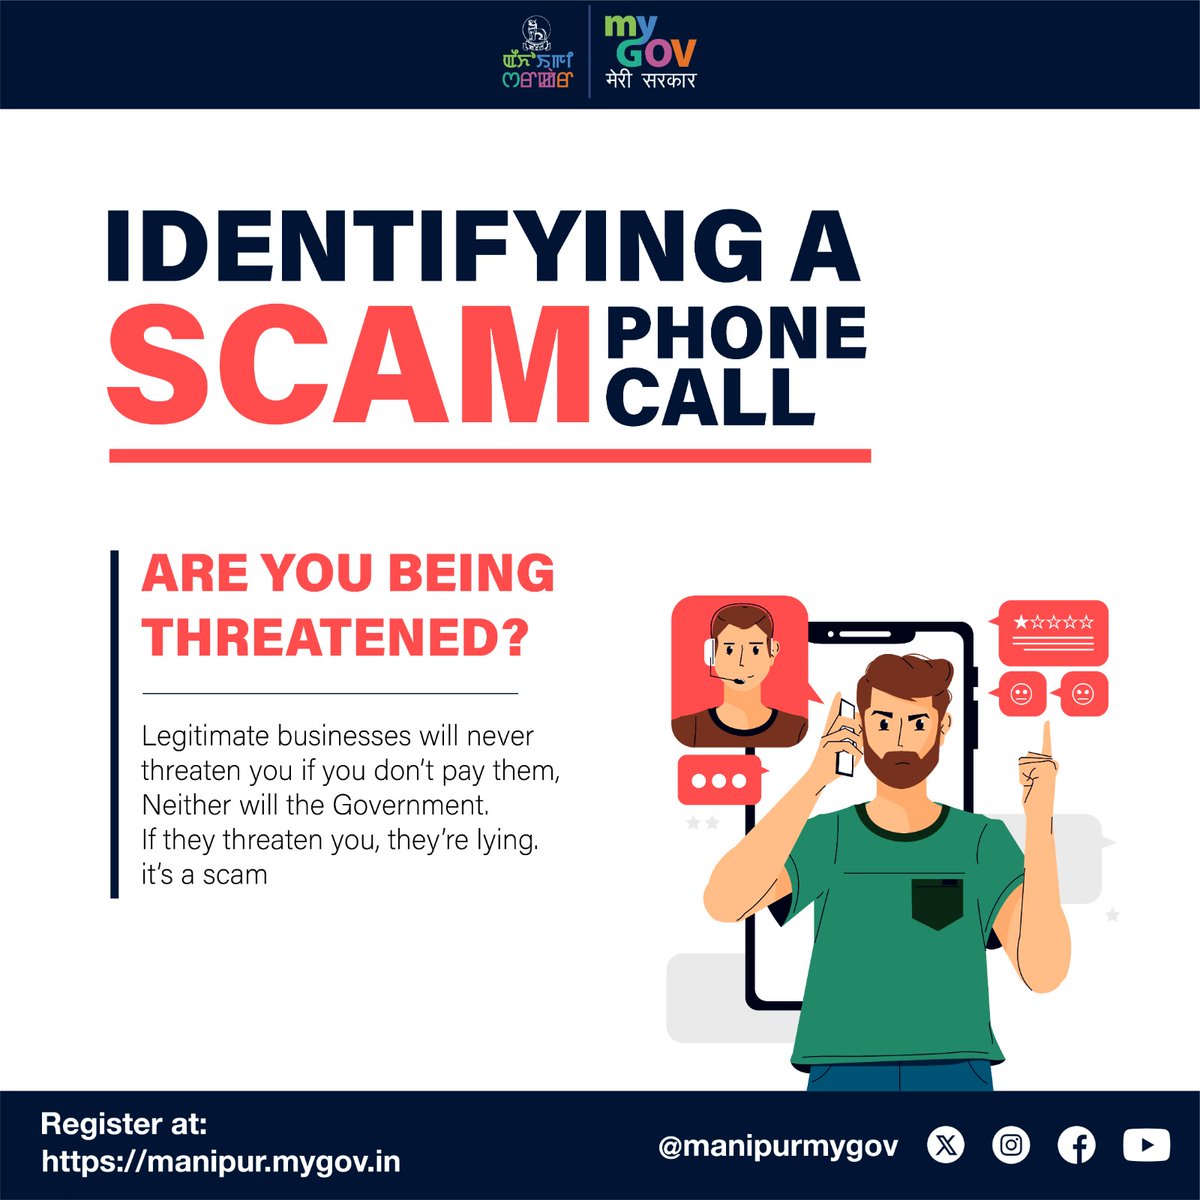 Several people have fallen victim to online scammers while many have been trapped and lost money. Protect yourself, your family & friends from cyber fraud by raising awareness